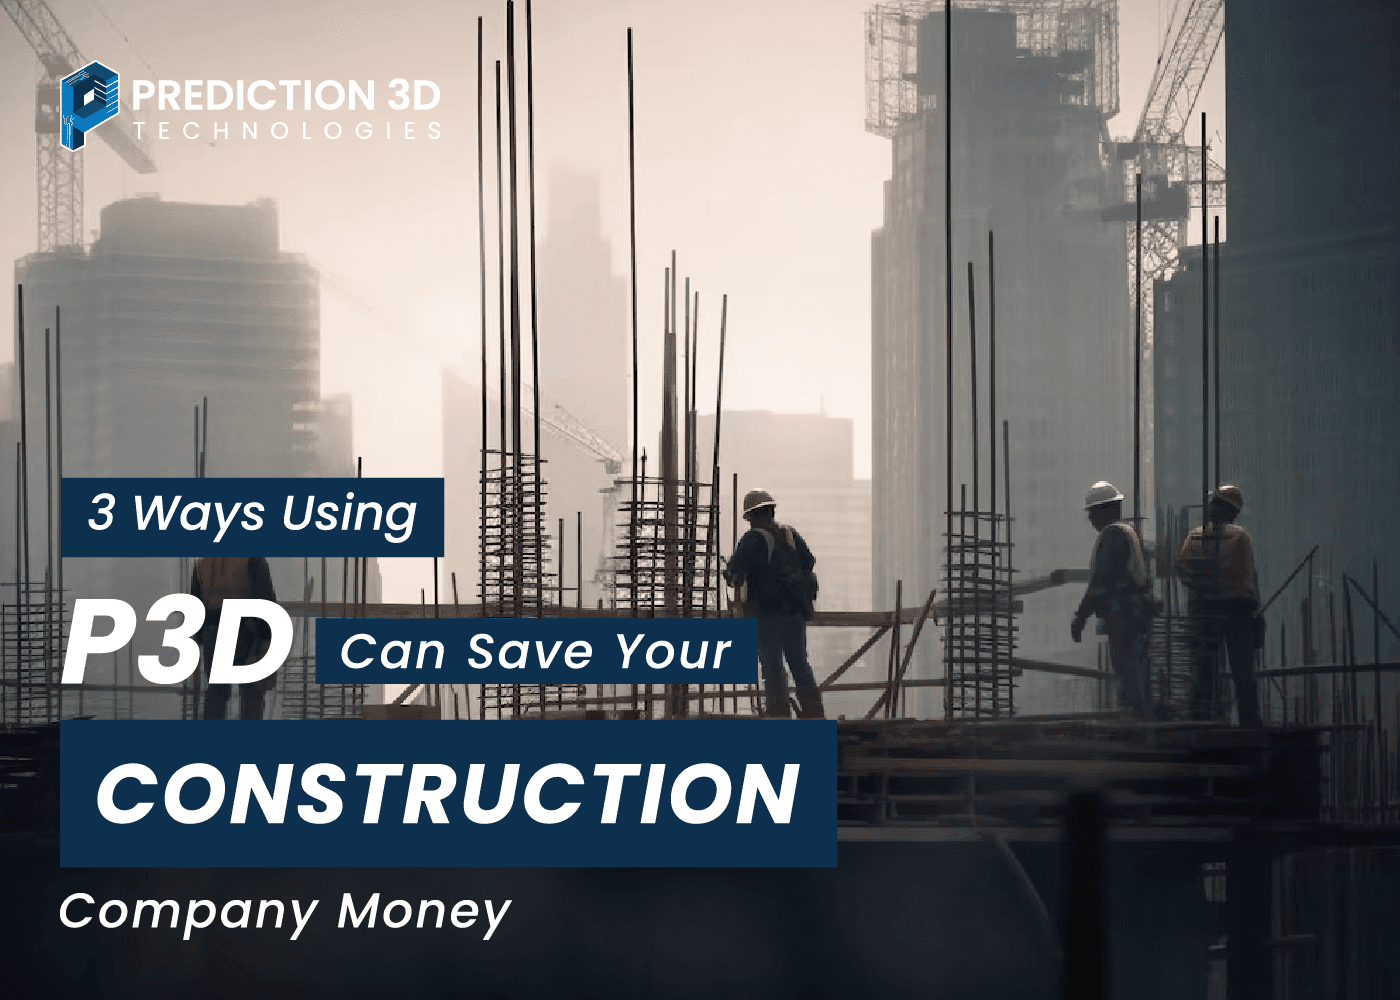 3 ways using Prediction 3d can save your construction company money